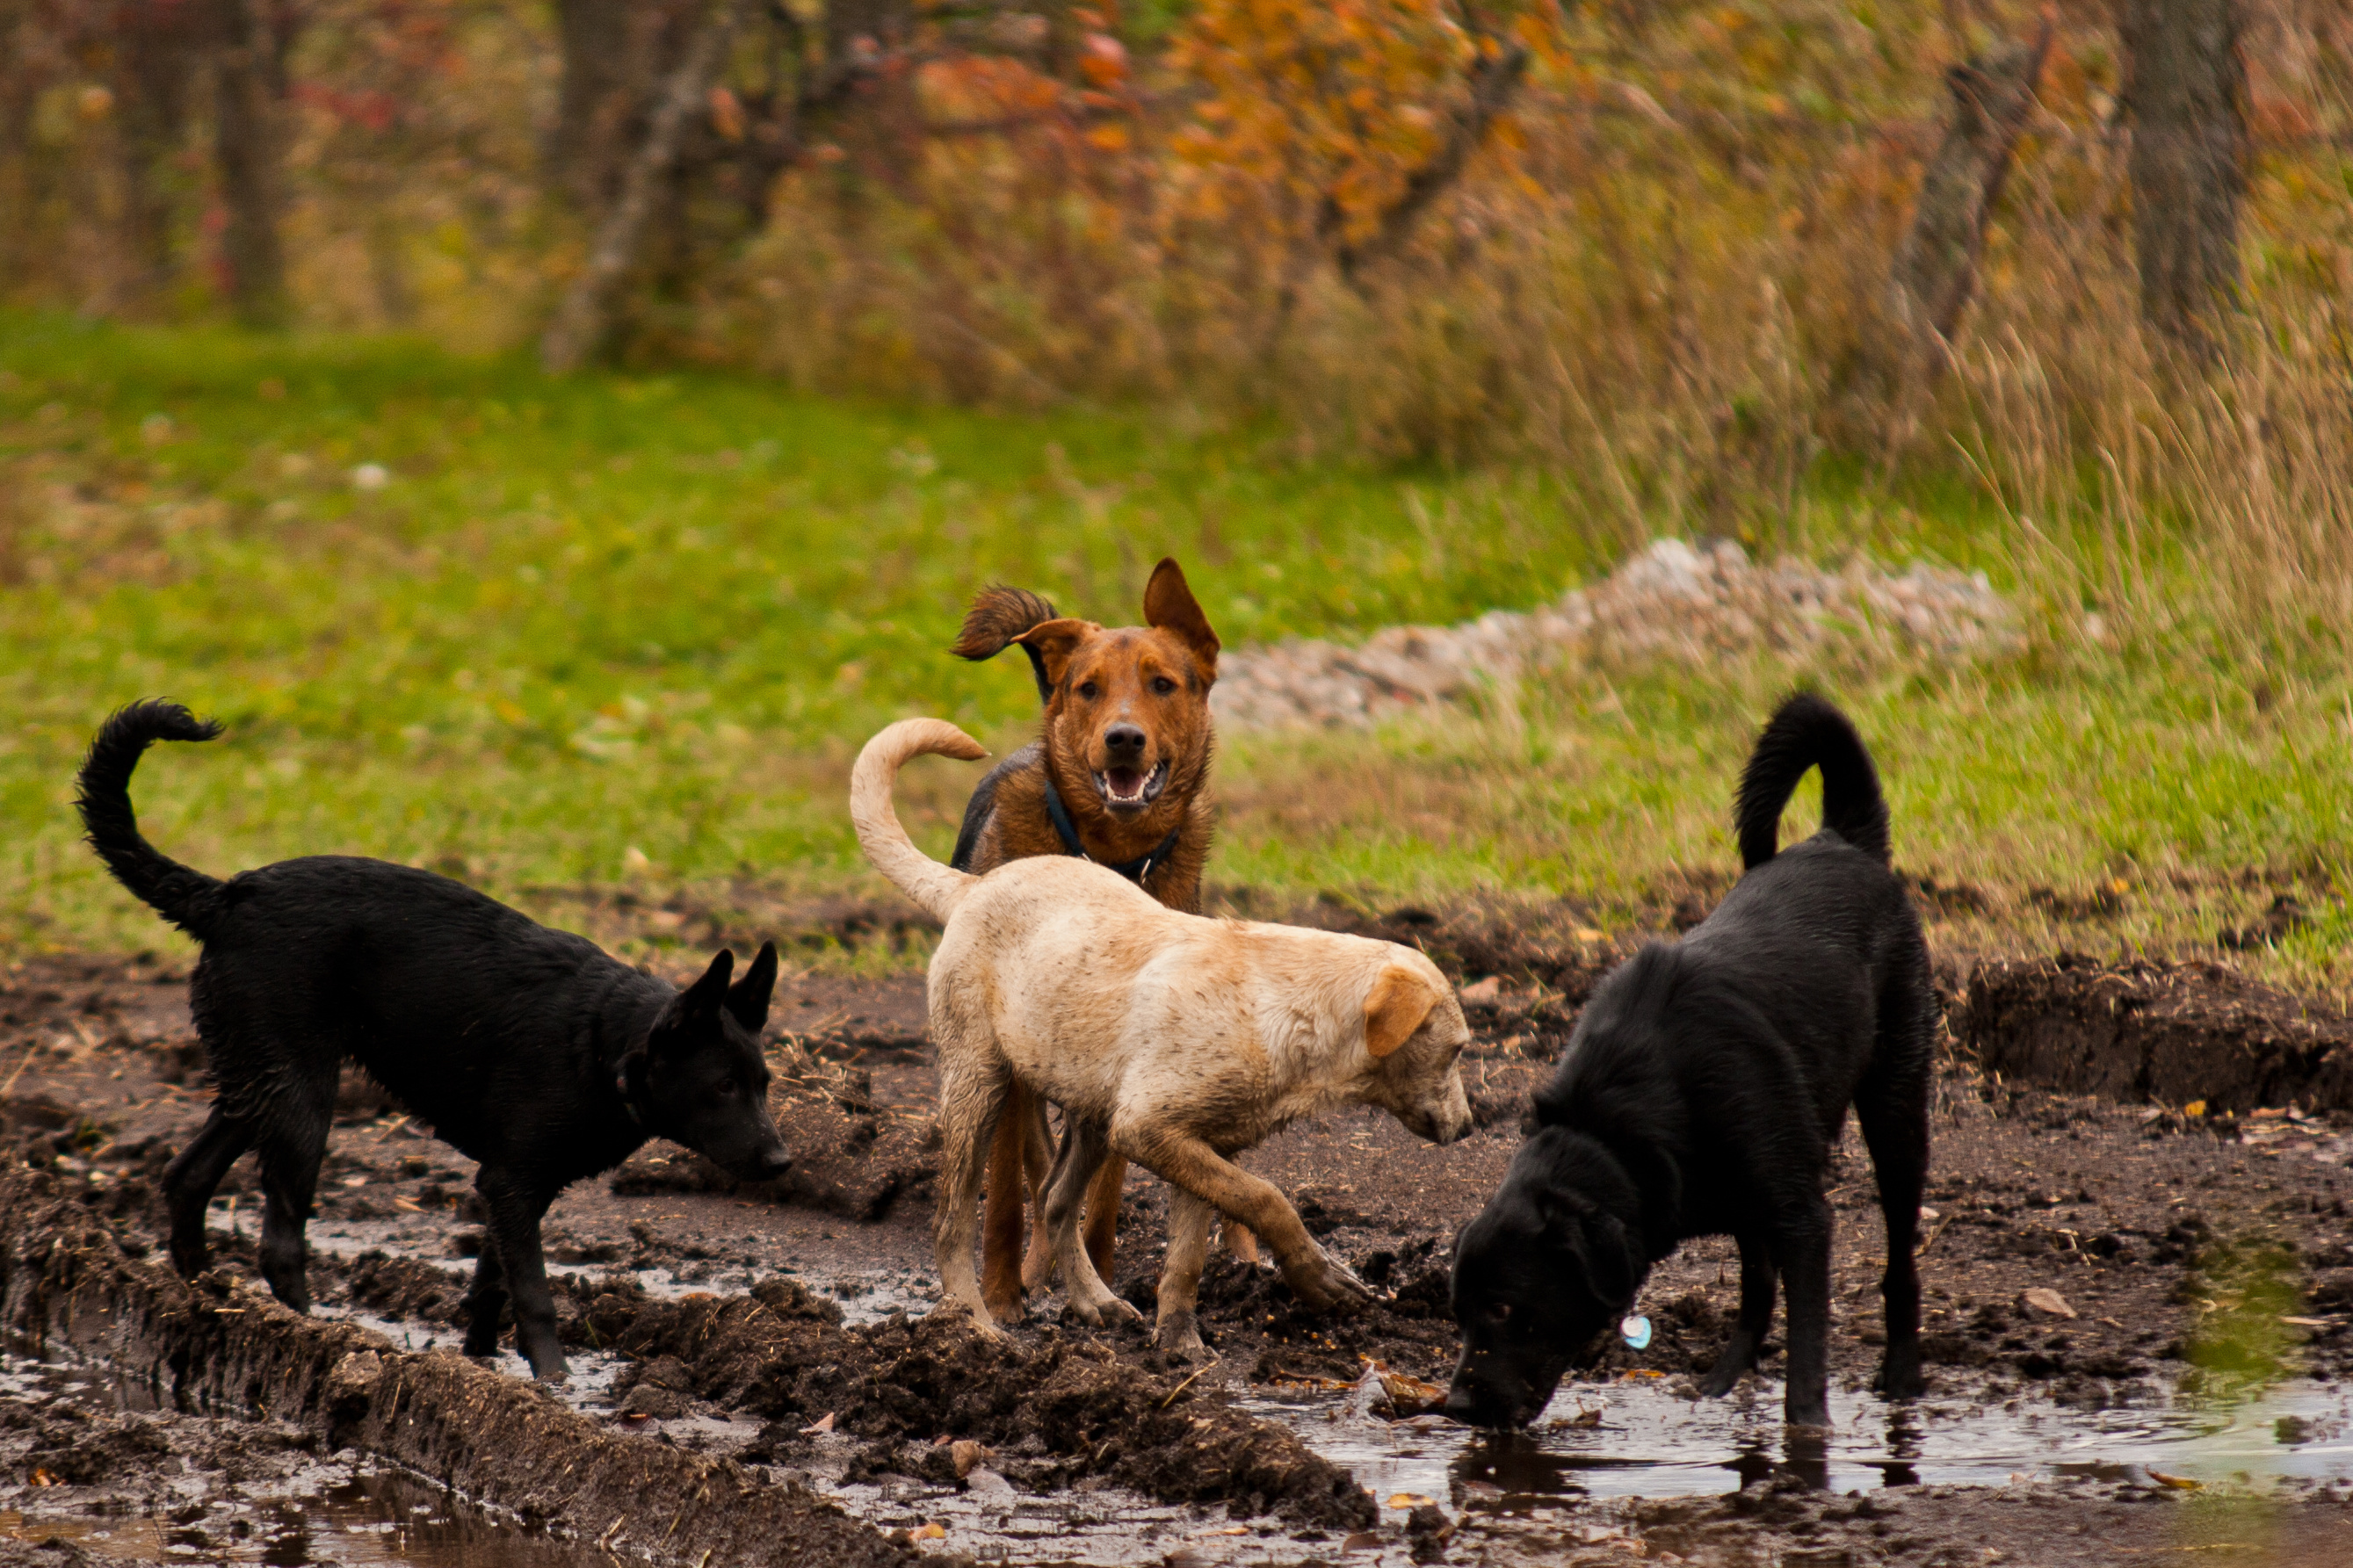 Four dogs p[laying in mud